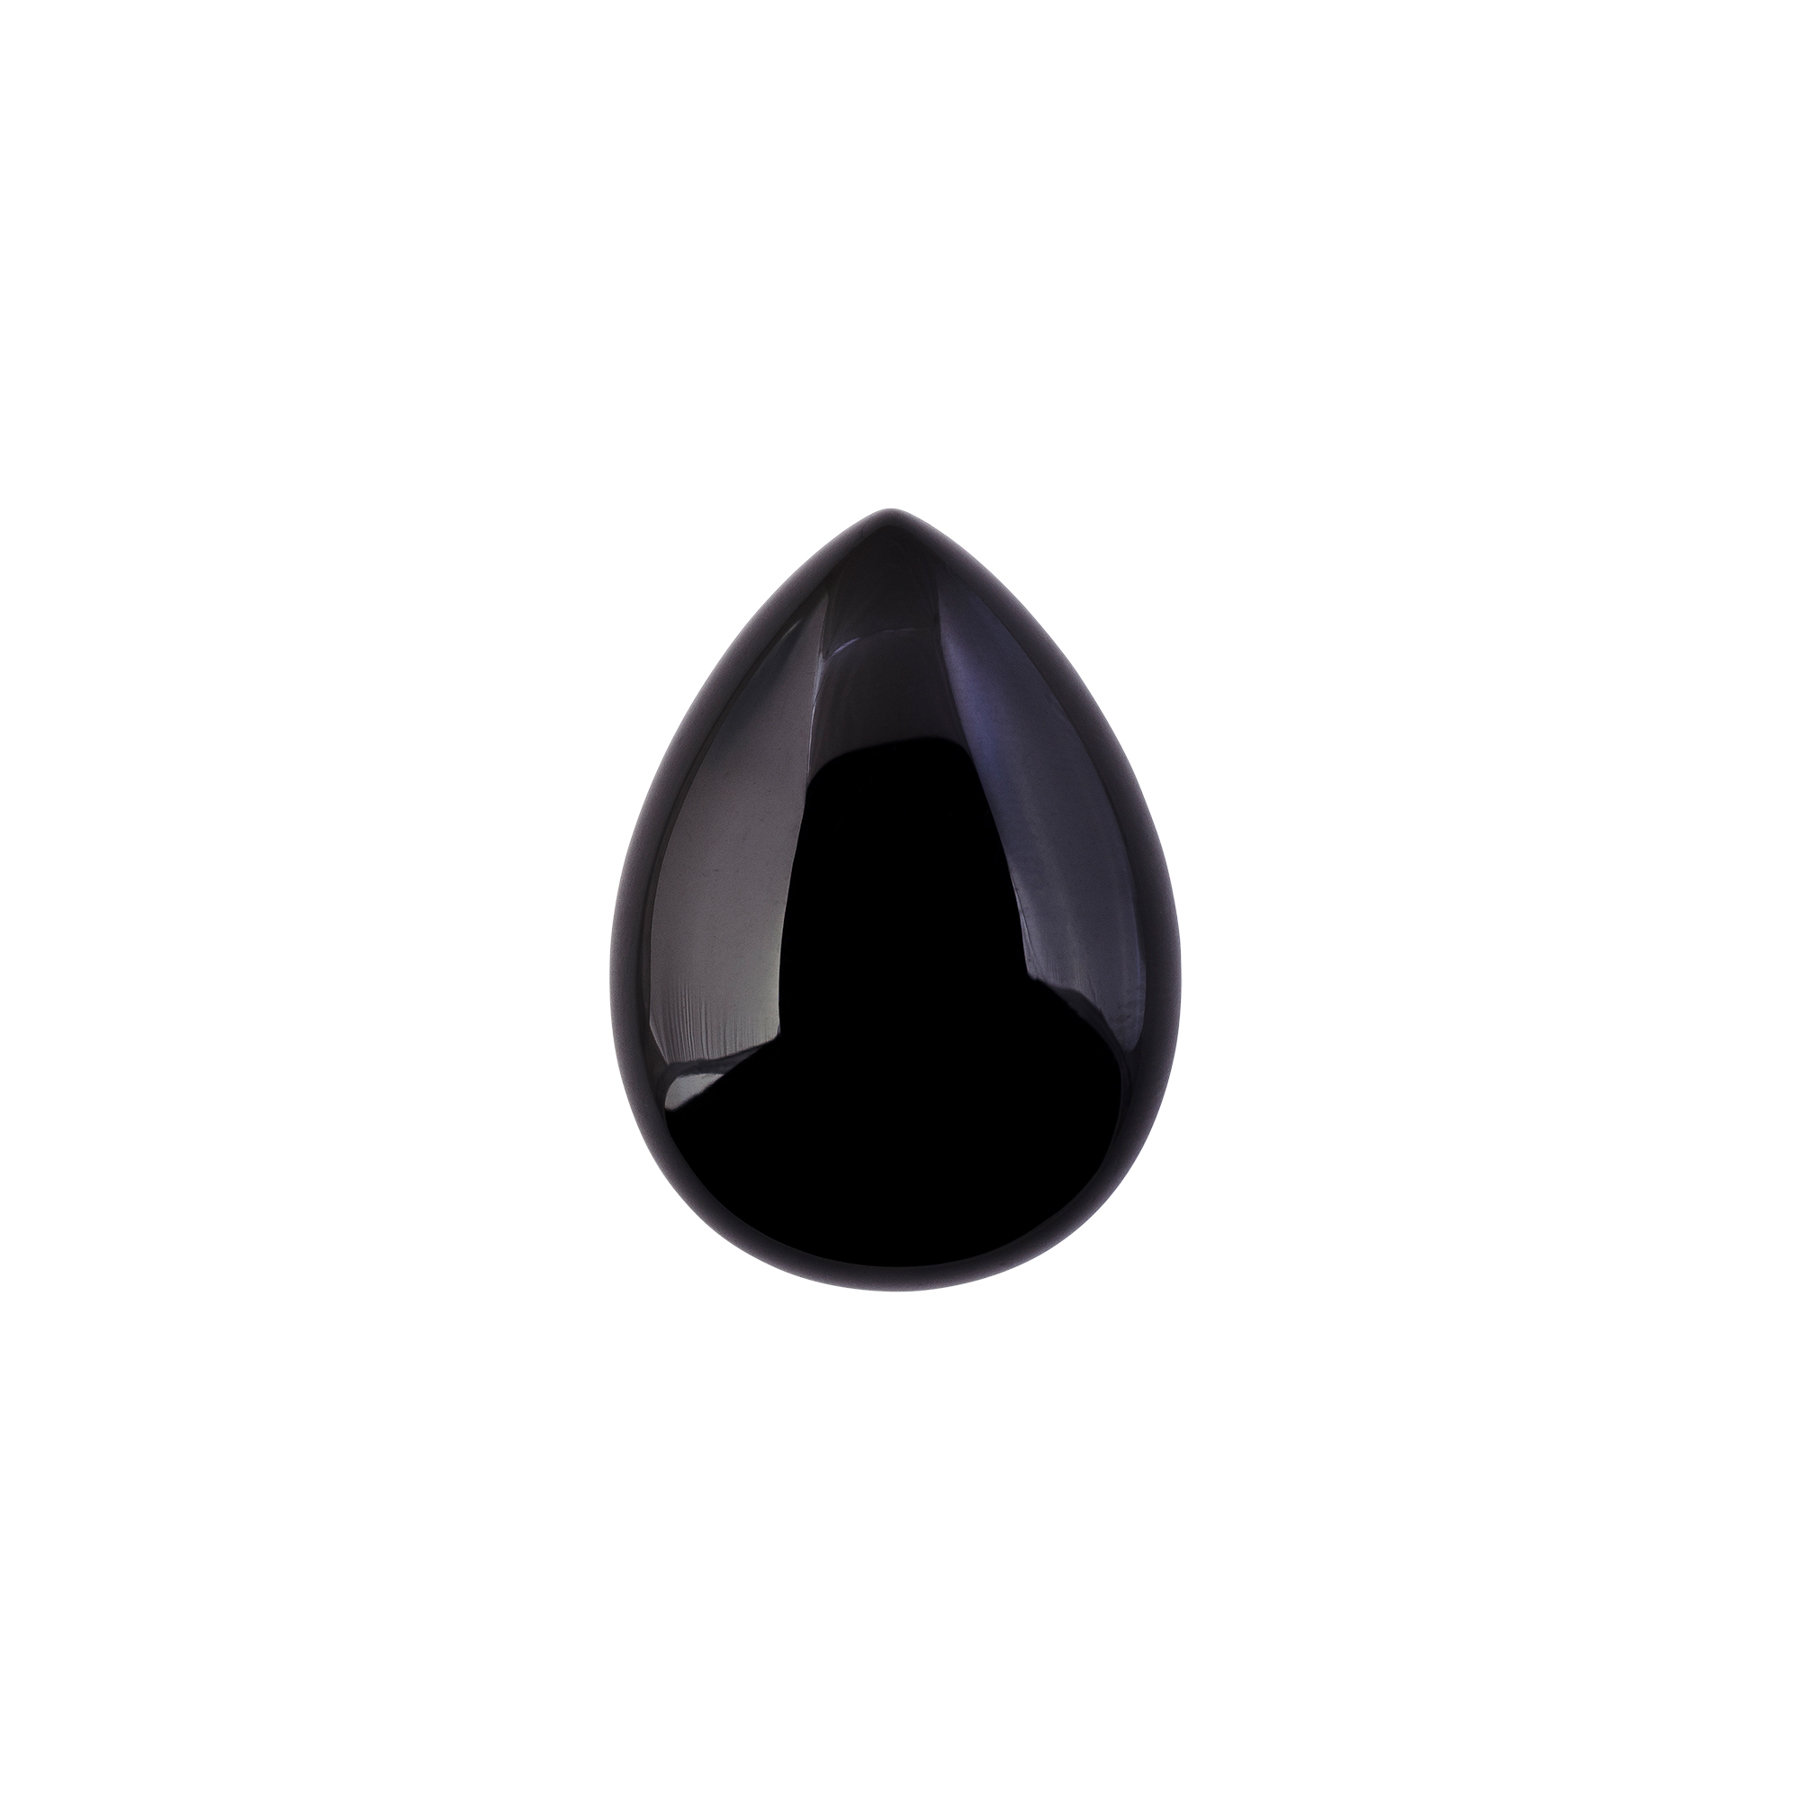 set of 10 Details about   Black Onyx 3mm round Black Onyx cabochon loose stones 